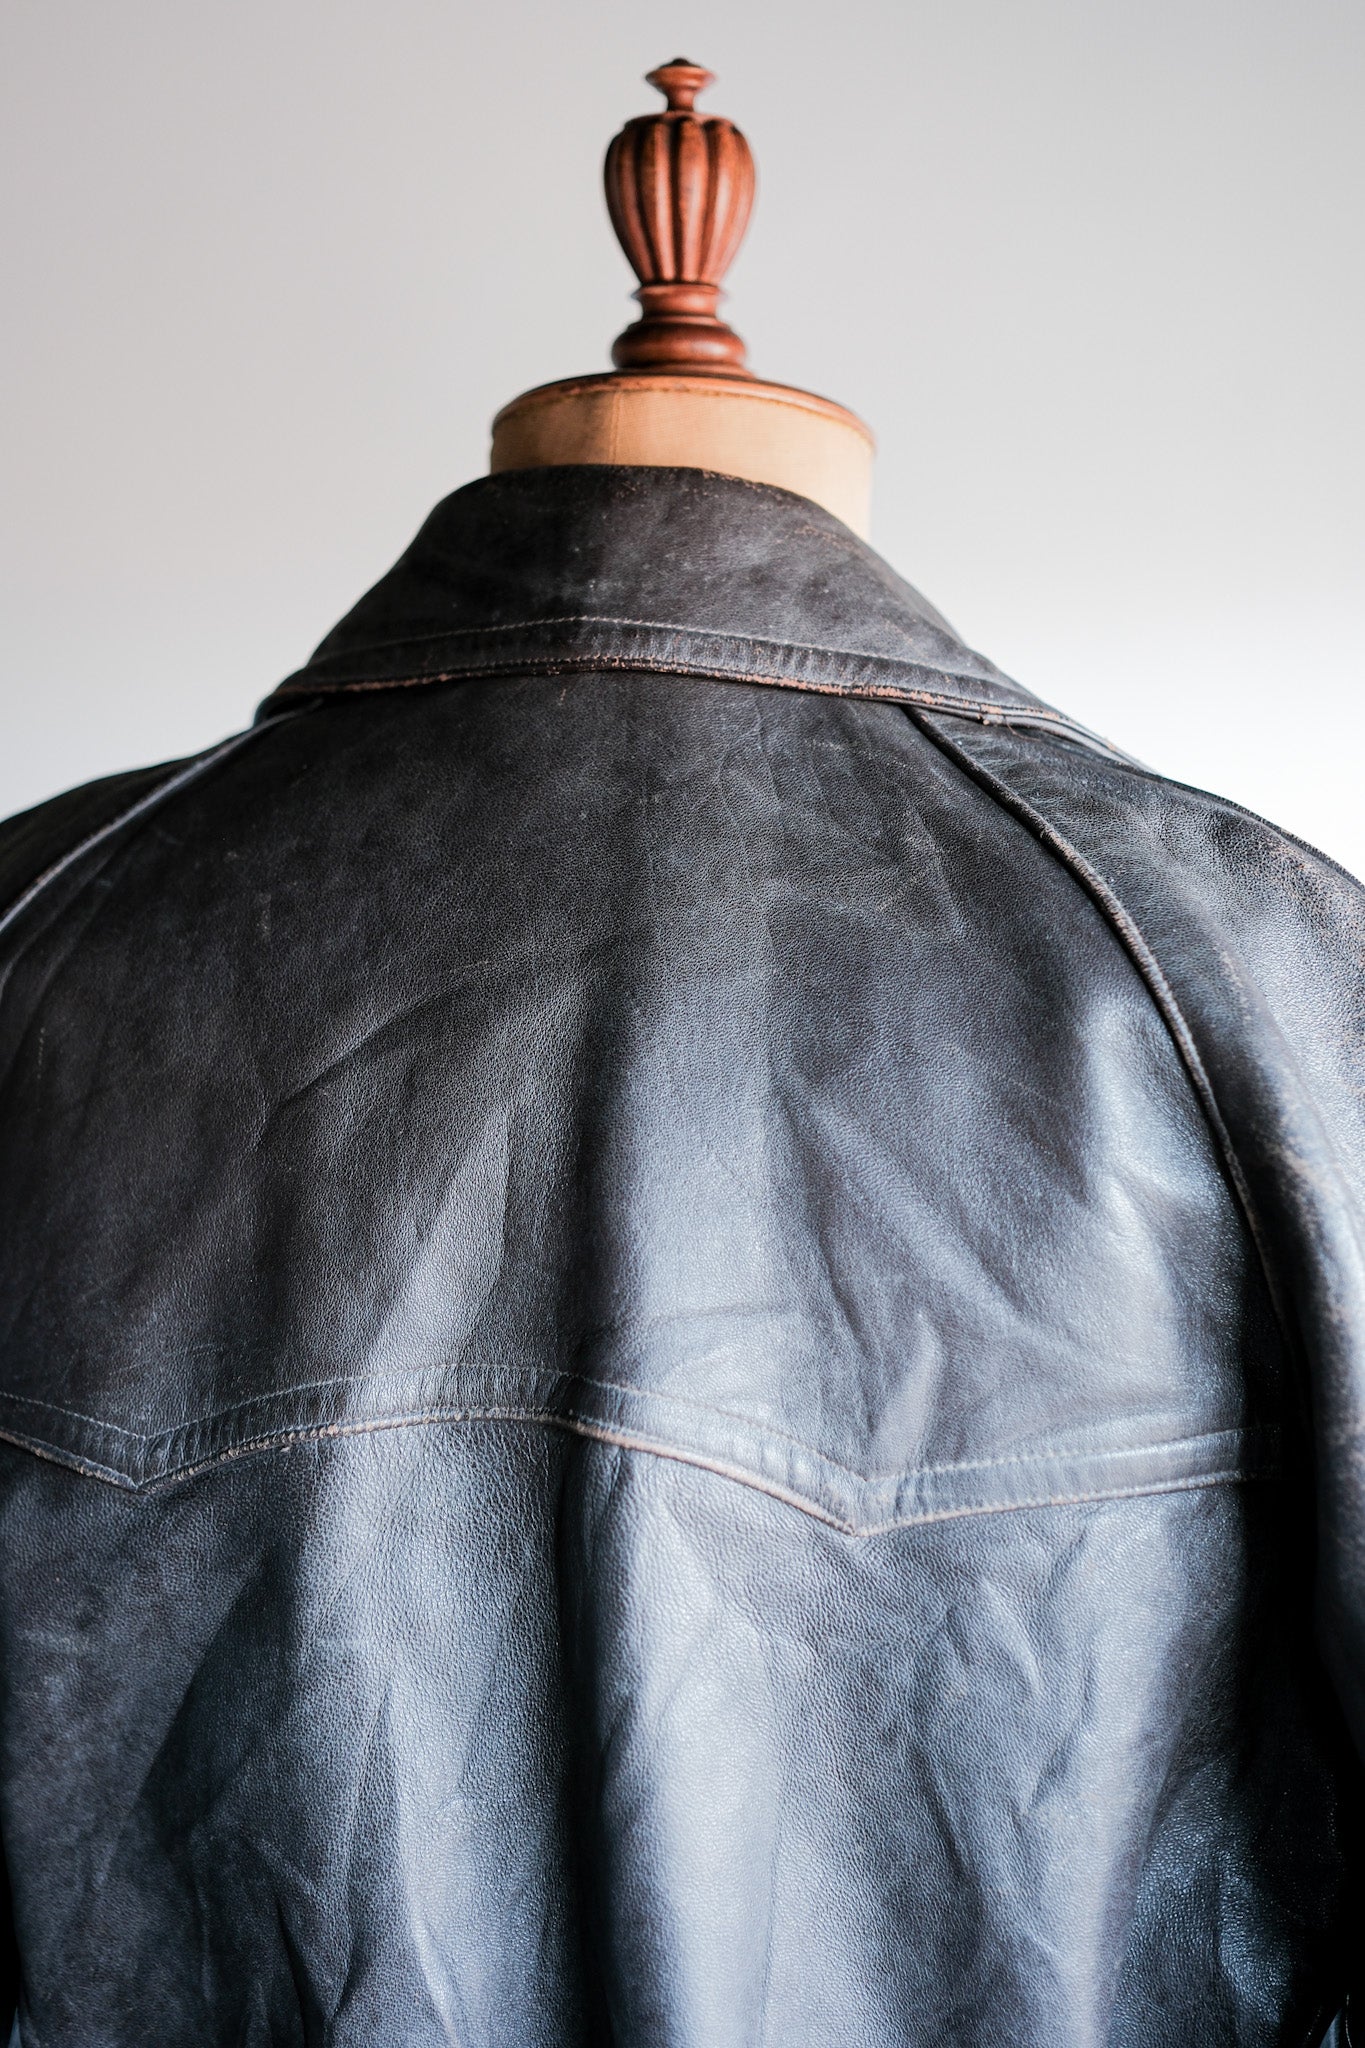 【~50's】French Vintage Double Breasted Leather Work Coat Size.54 "Adolphe Lafont"